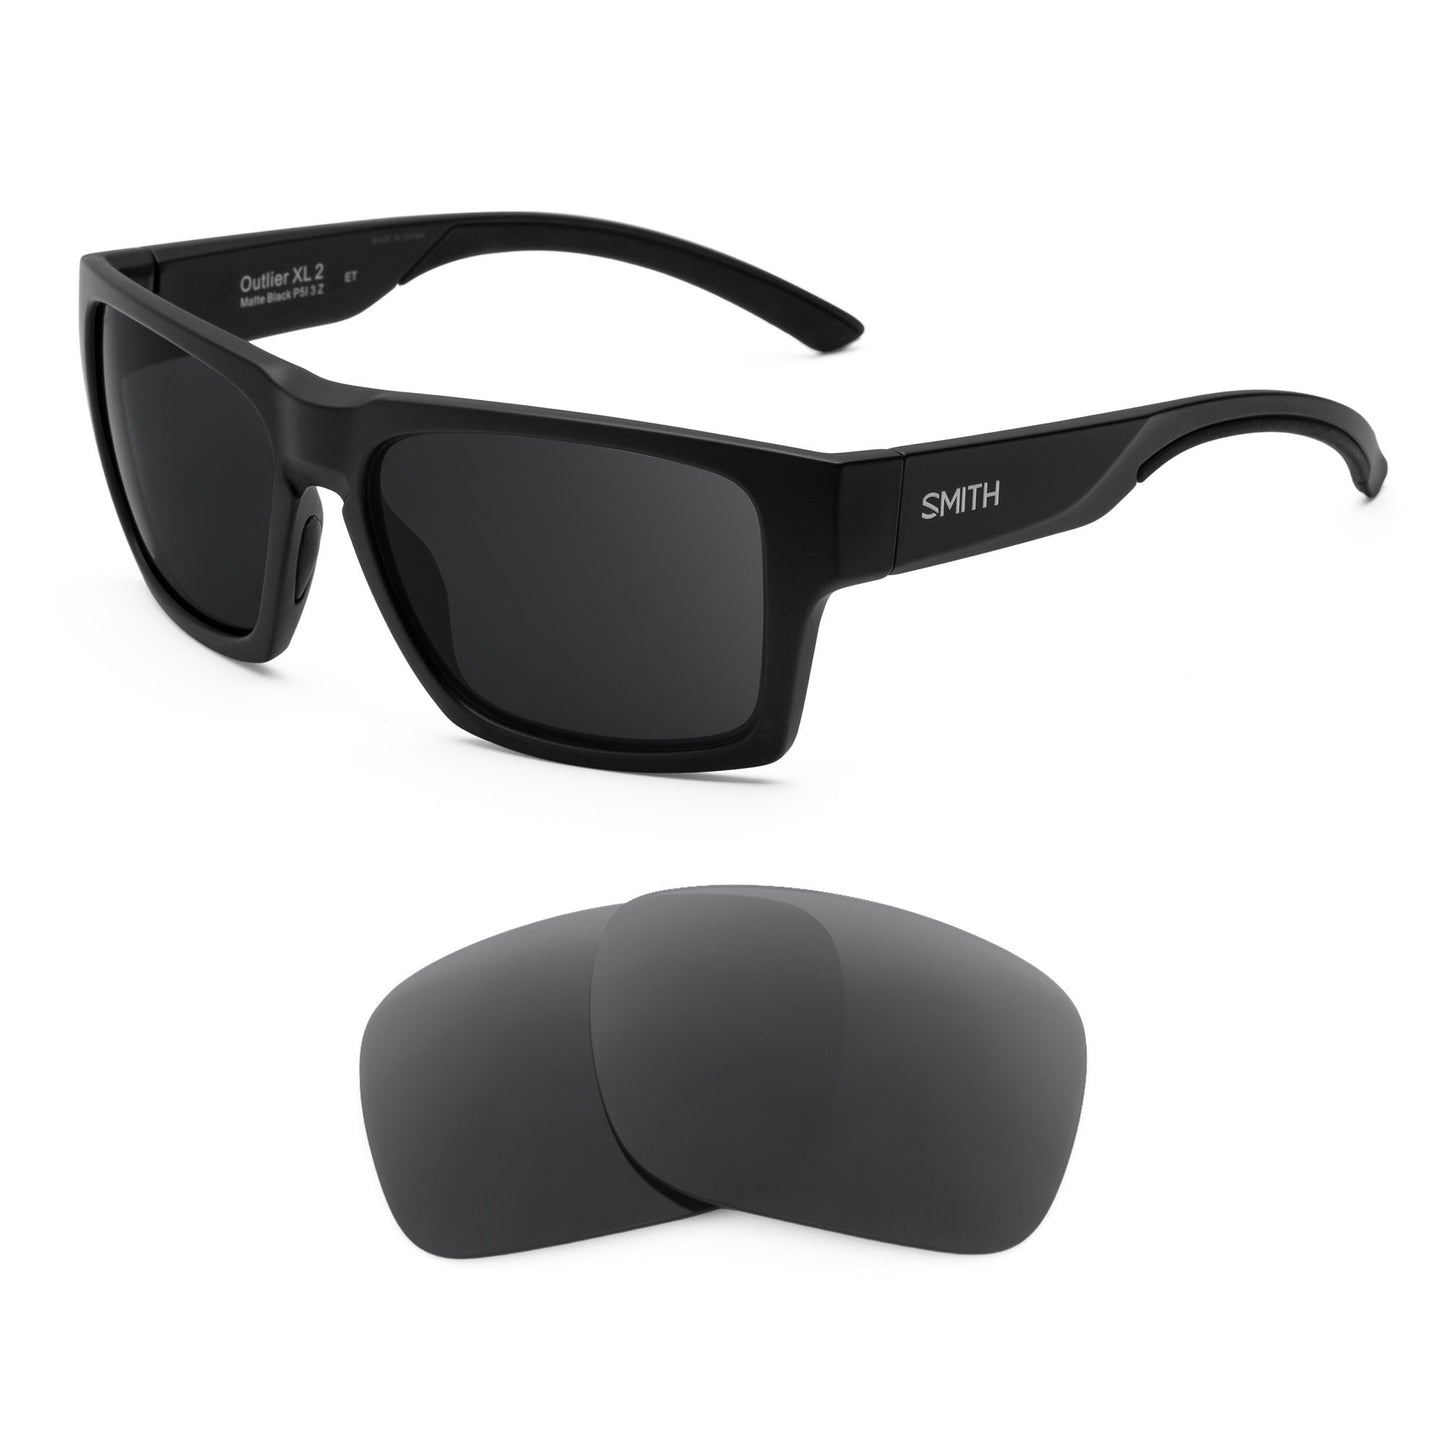 Smith Outlier 2 XL sunglasses with replacement lenses